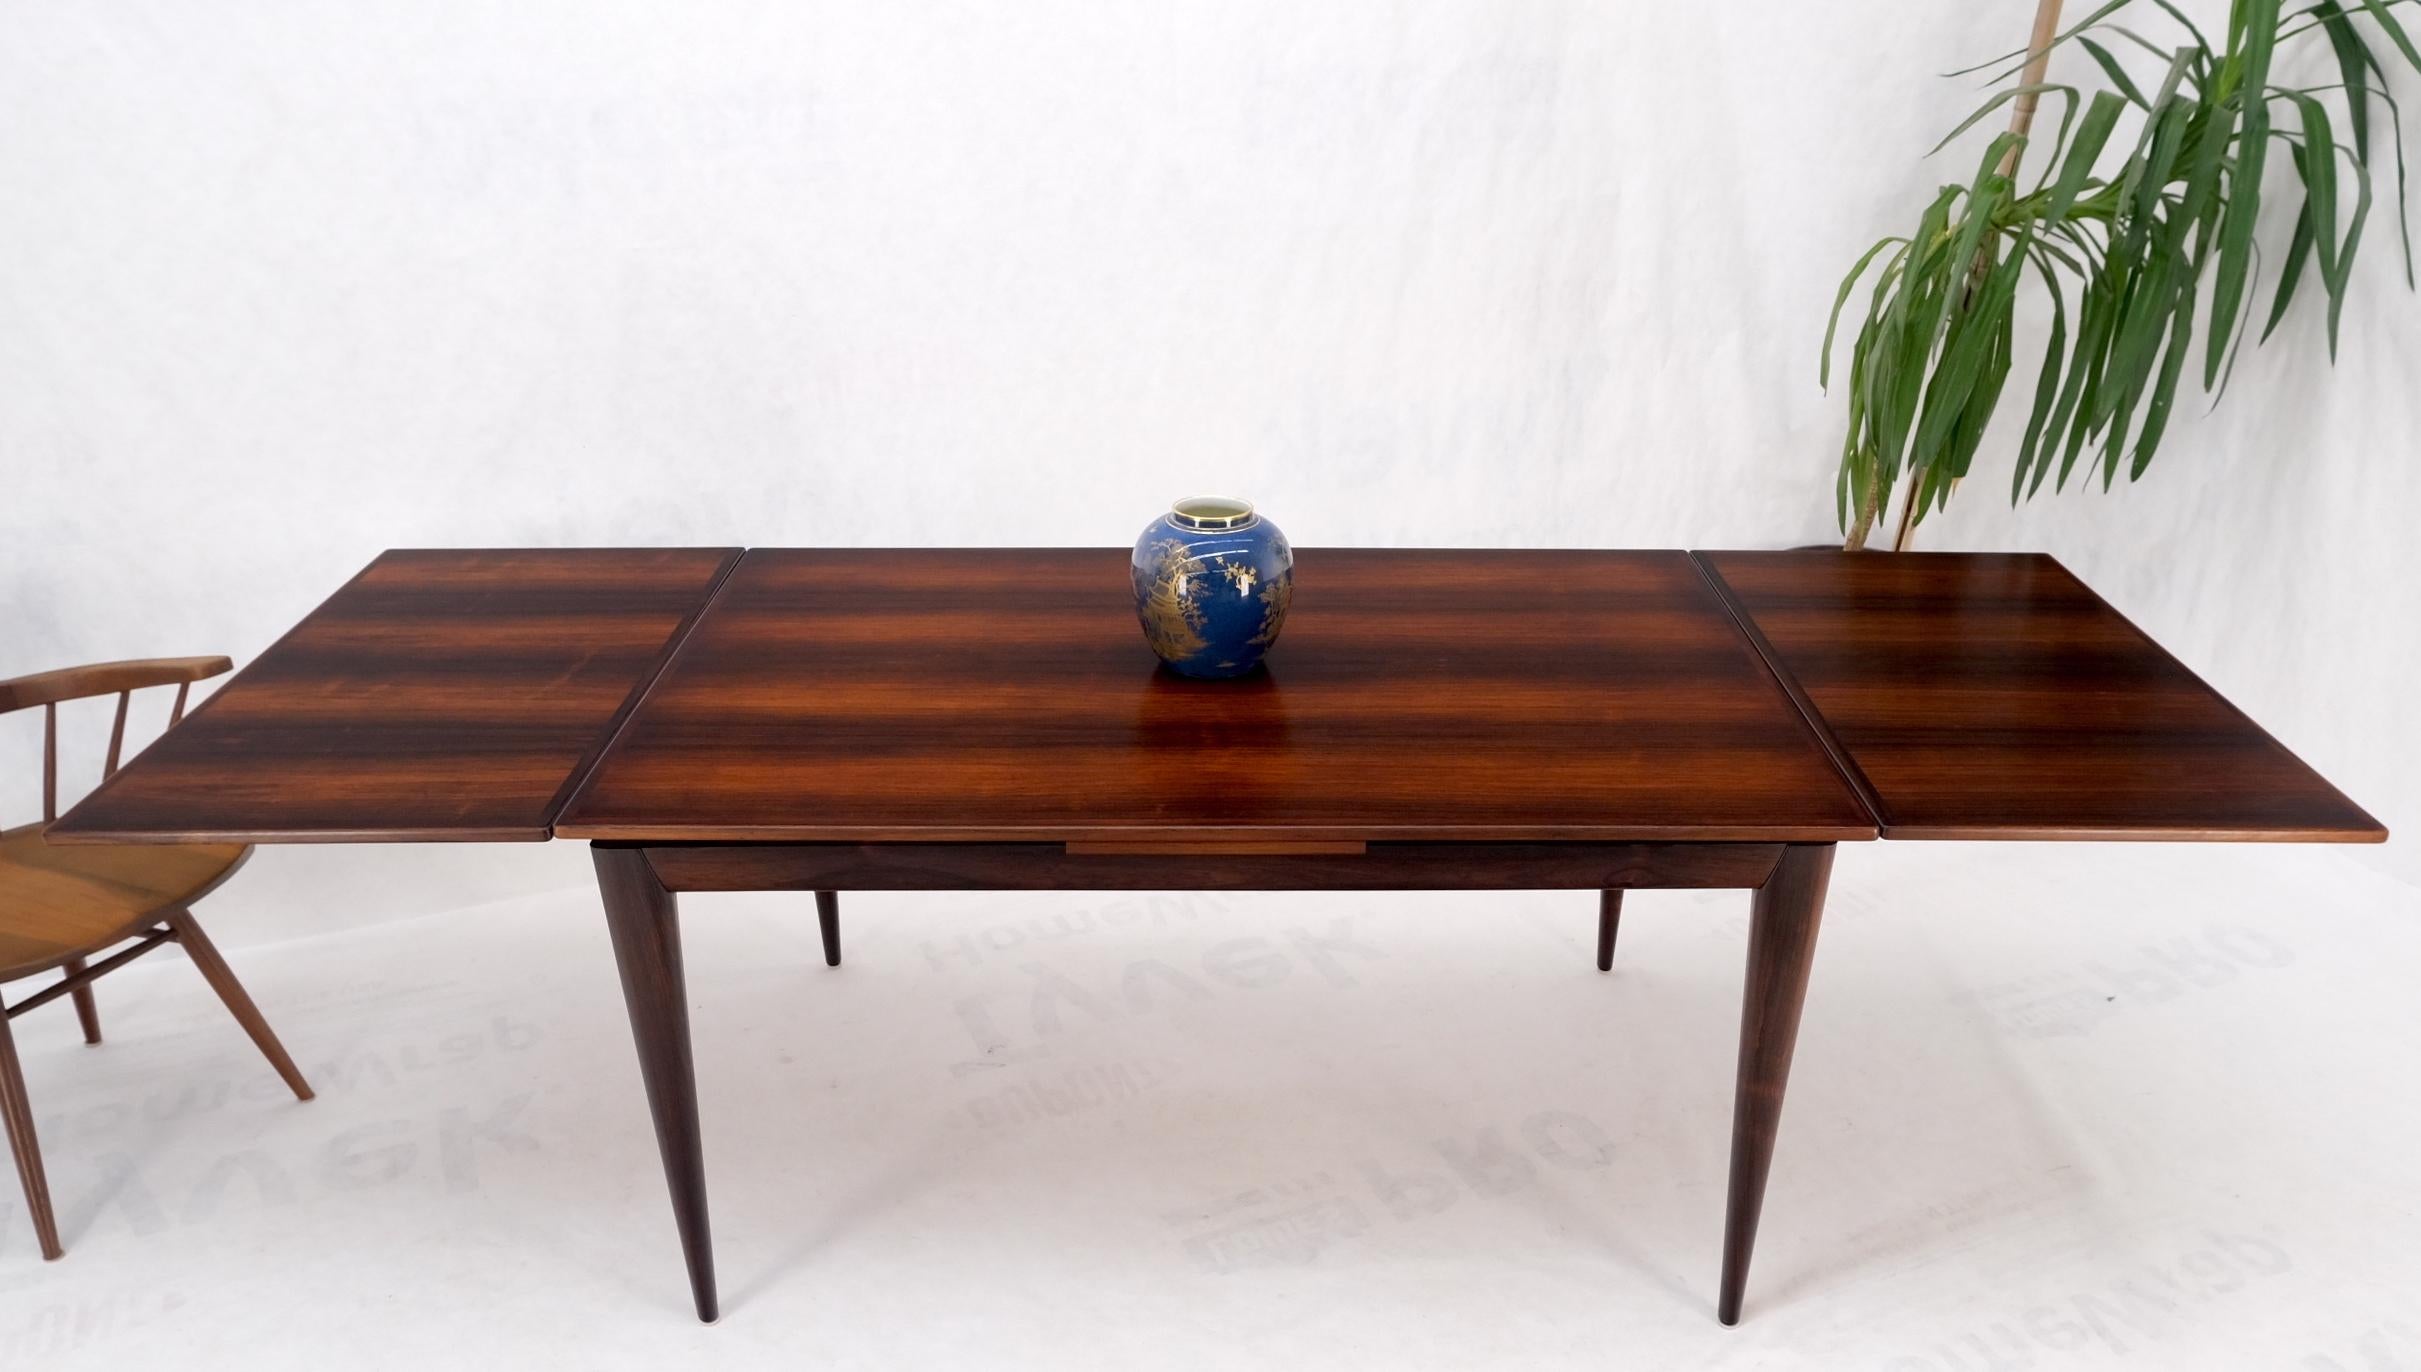 Danish Mid-Century Modern Moller solid rosewood frame refectory dining table mint!
Two leaves measuring 23 inches in width.